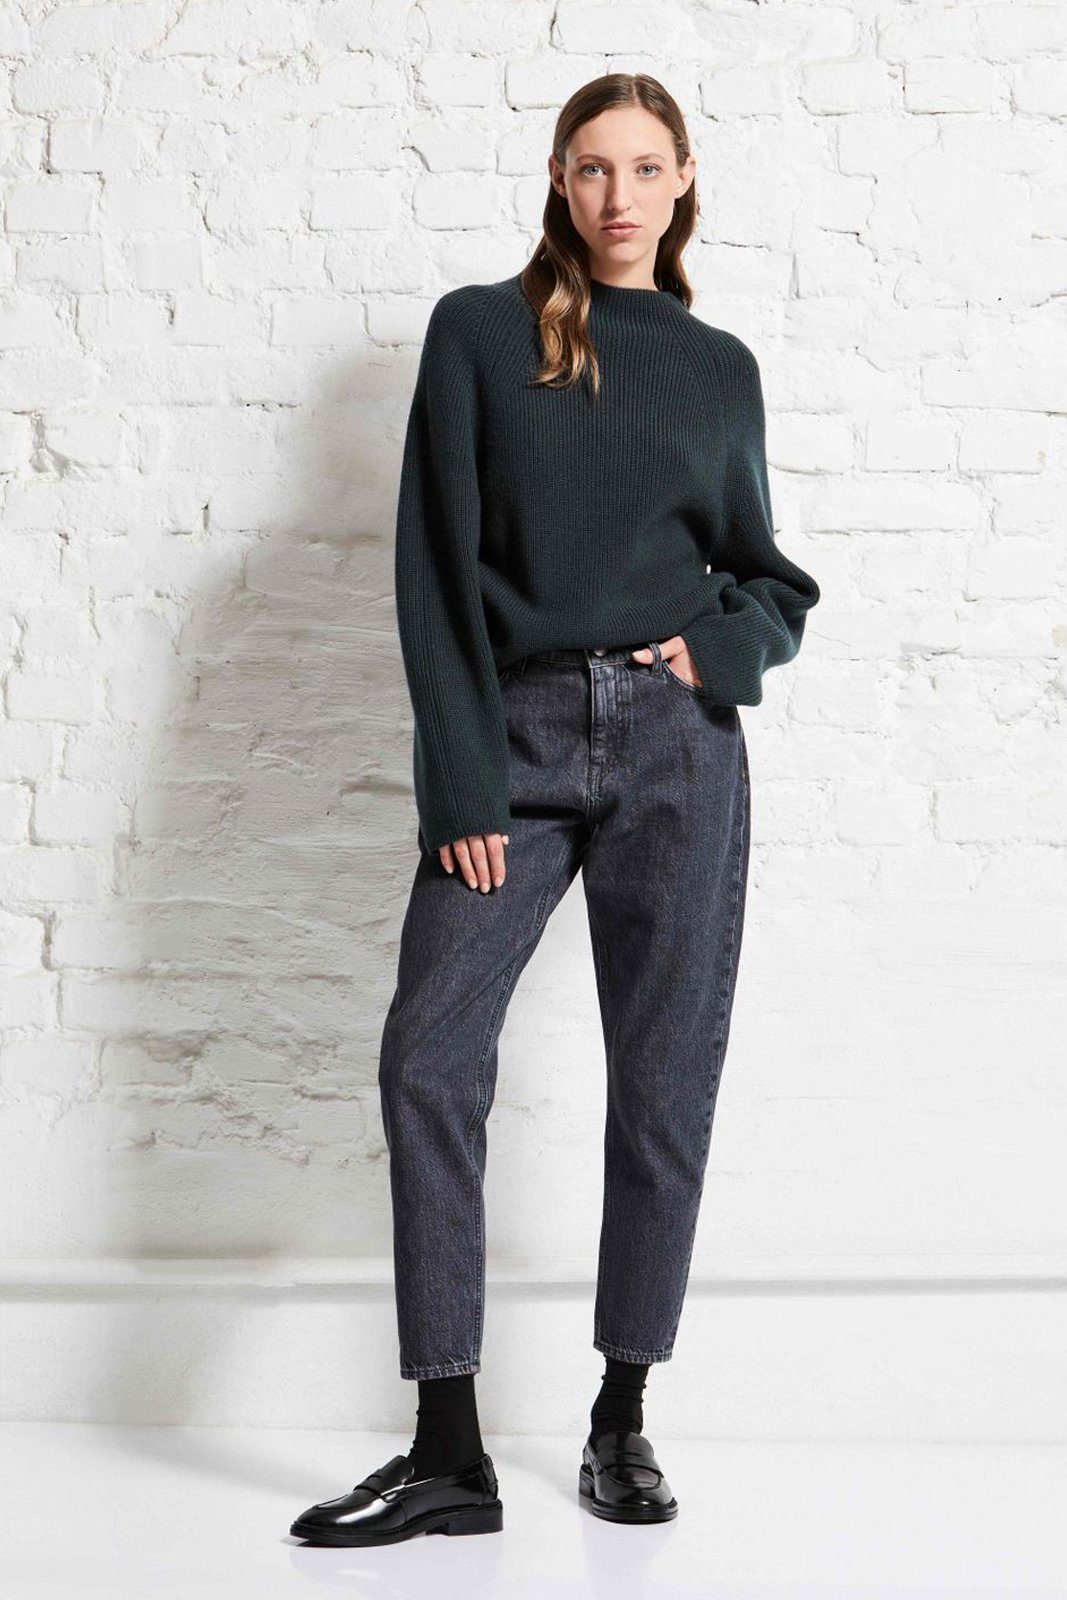 wunderwerk Mom-Jeans Collien carrot cropped eco bleached